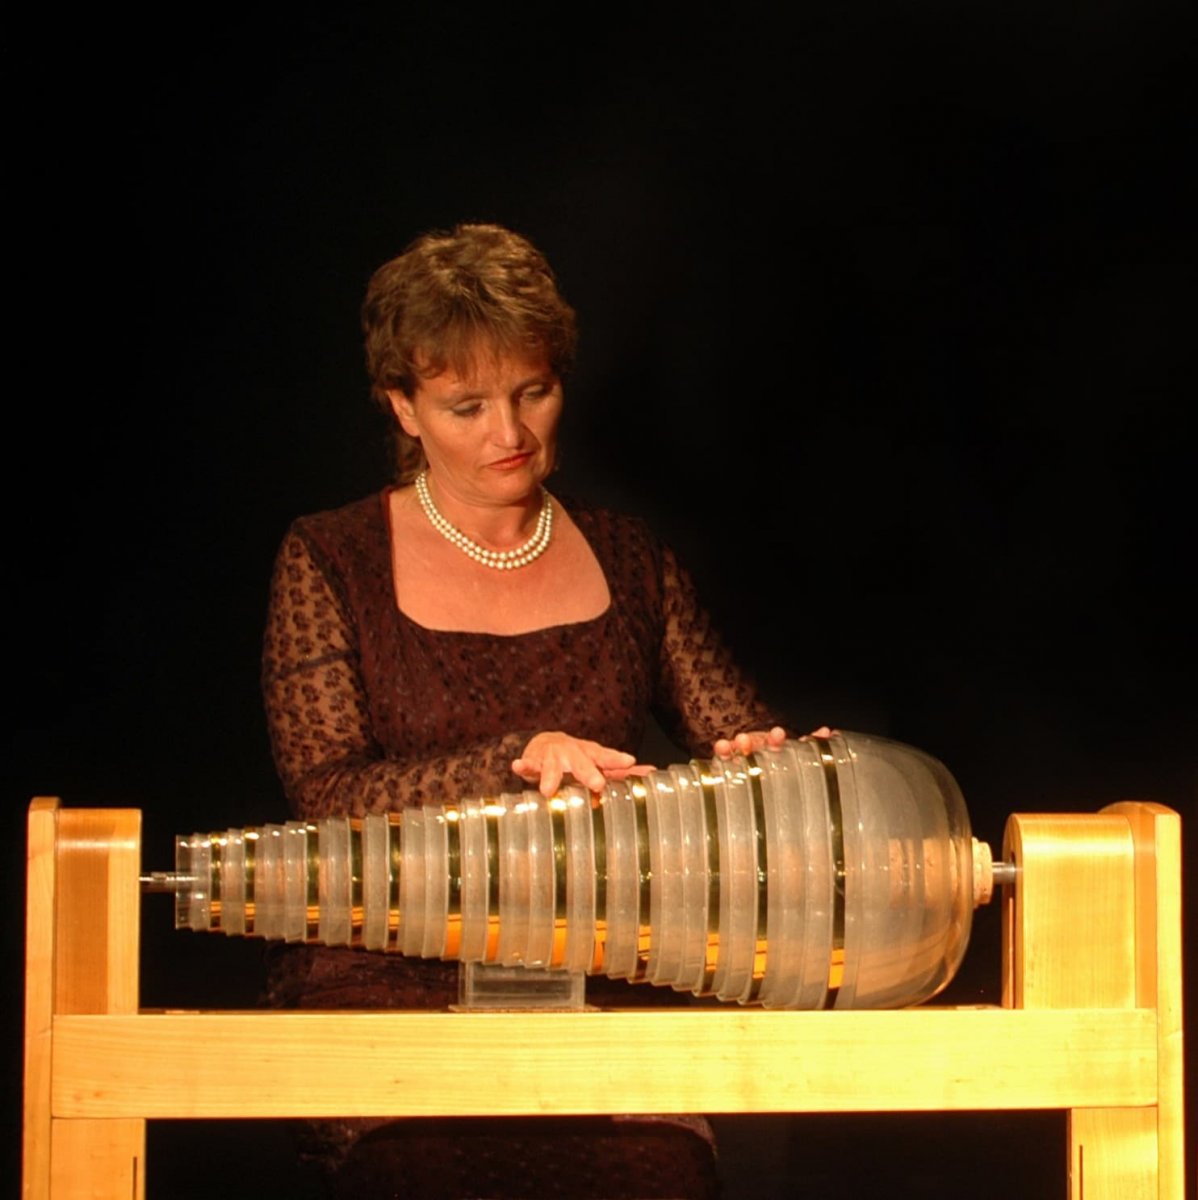 What is Glass Harmonica #2